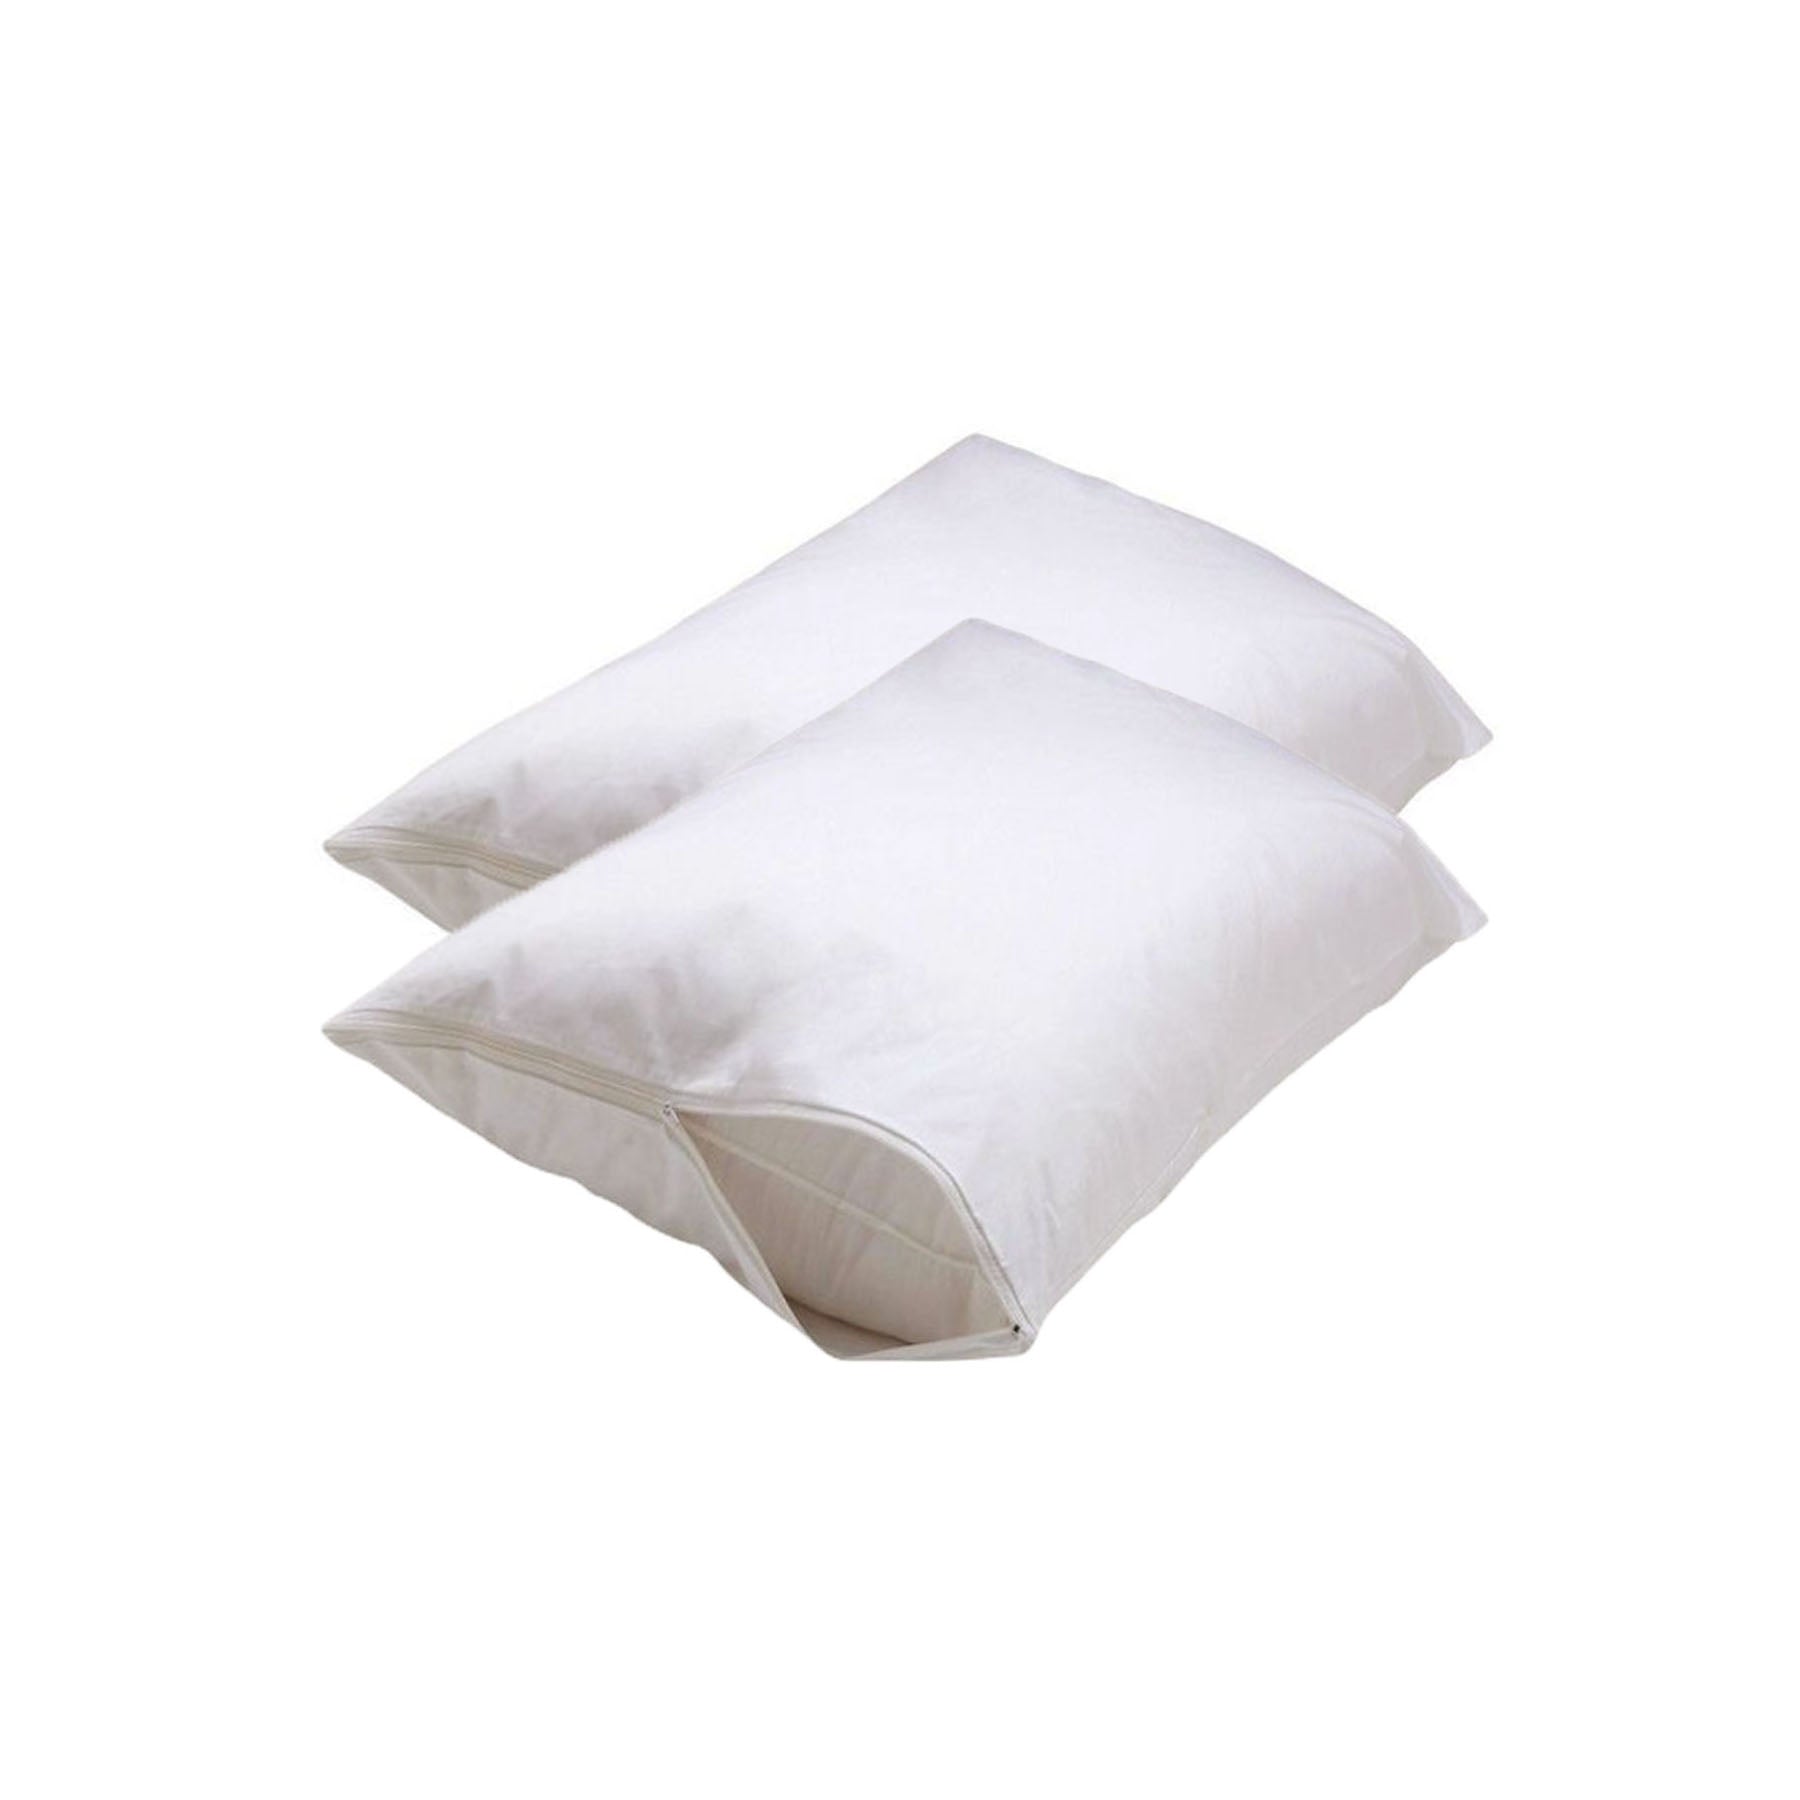 Set of 2 Stain Resistant Pillow Protectors Standard - Newstart Furniture